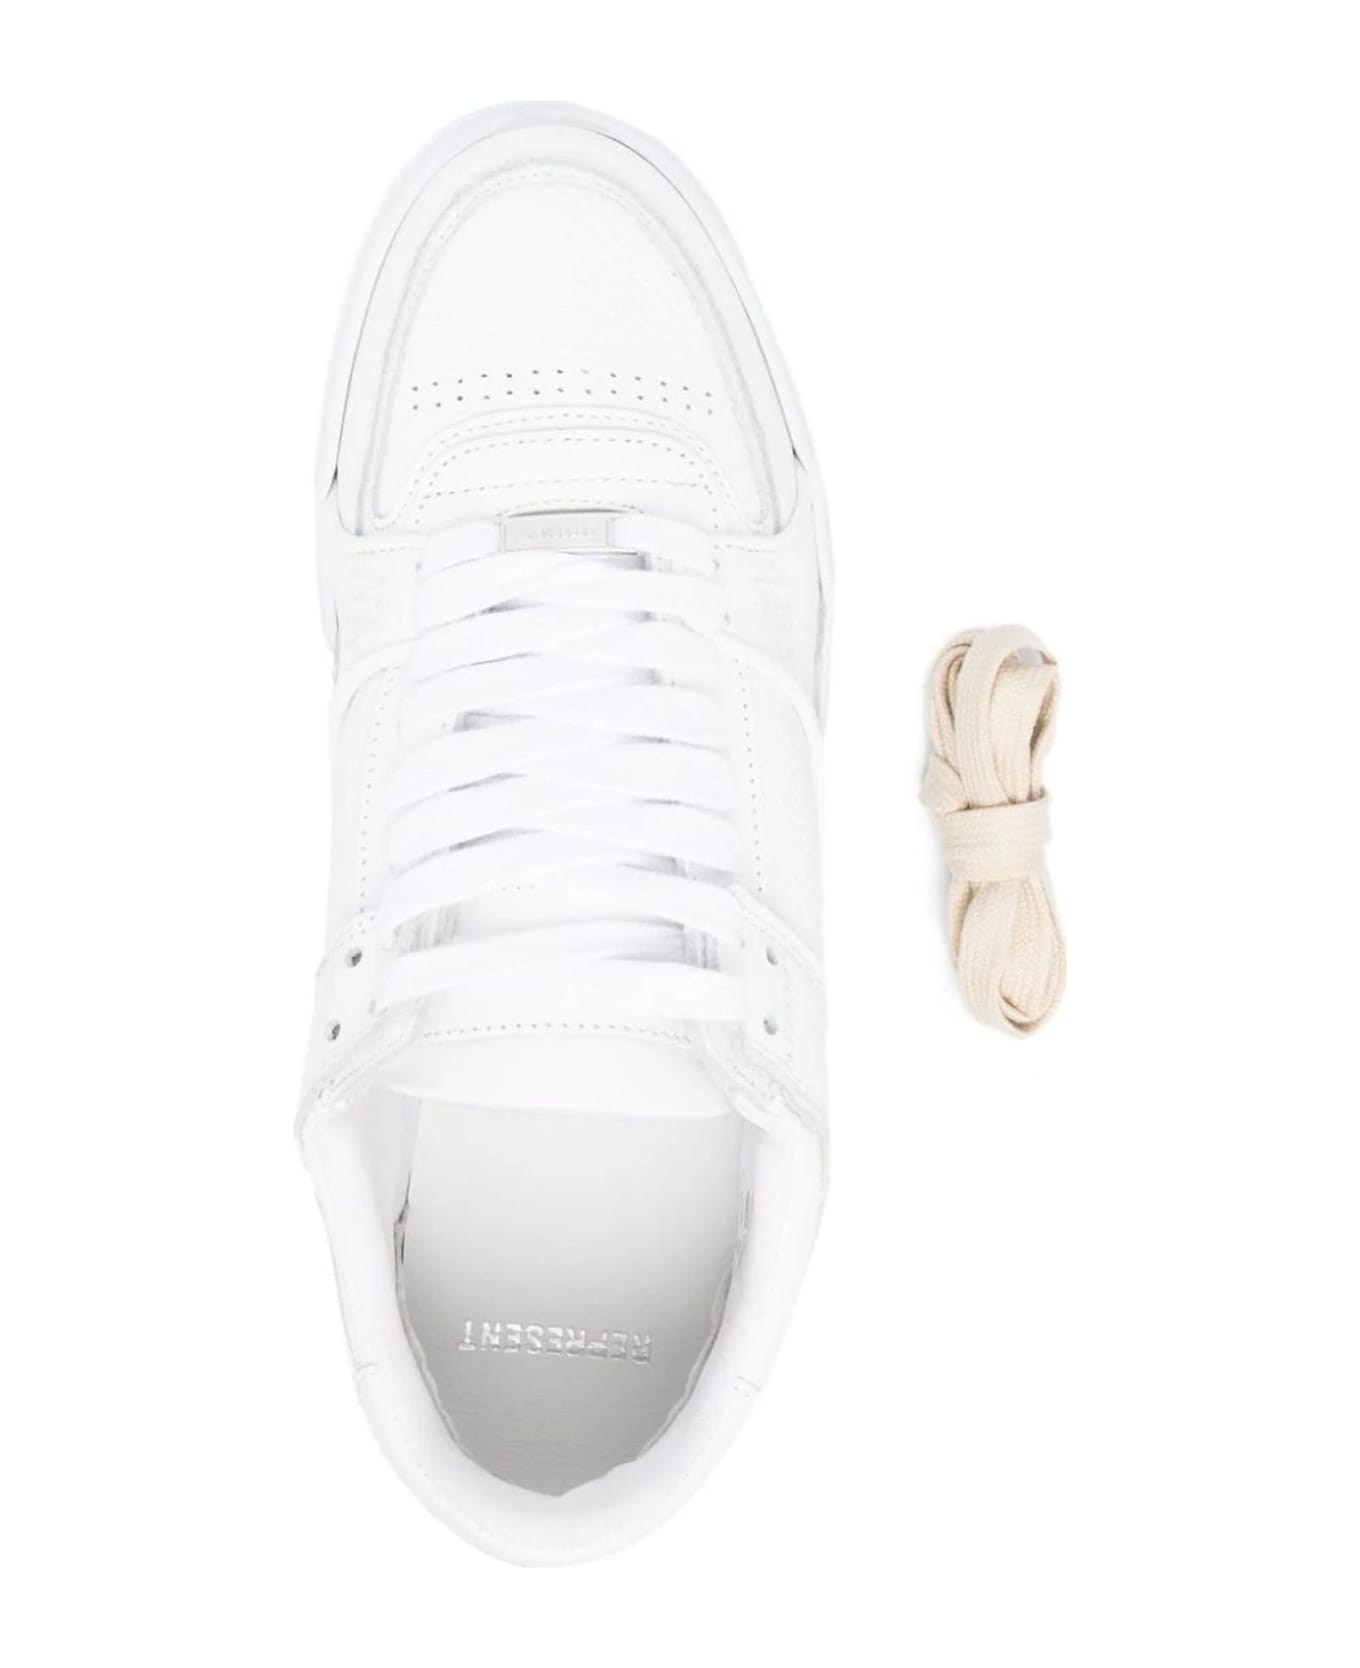 REPRESENT White Calf Leather Apex Sneakers Sneakers - FLAT WHITE